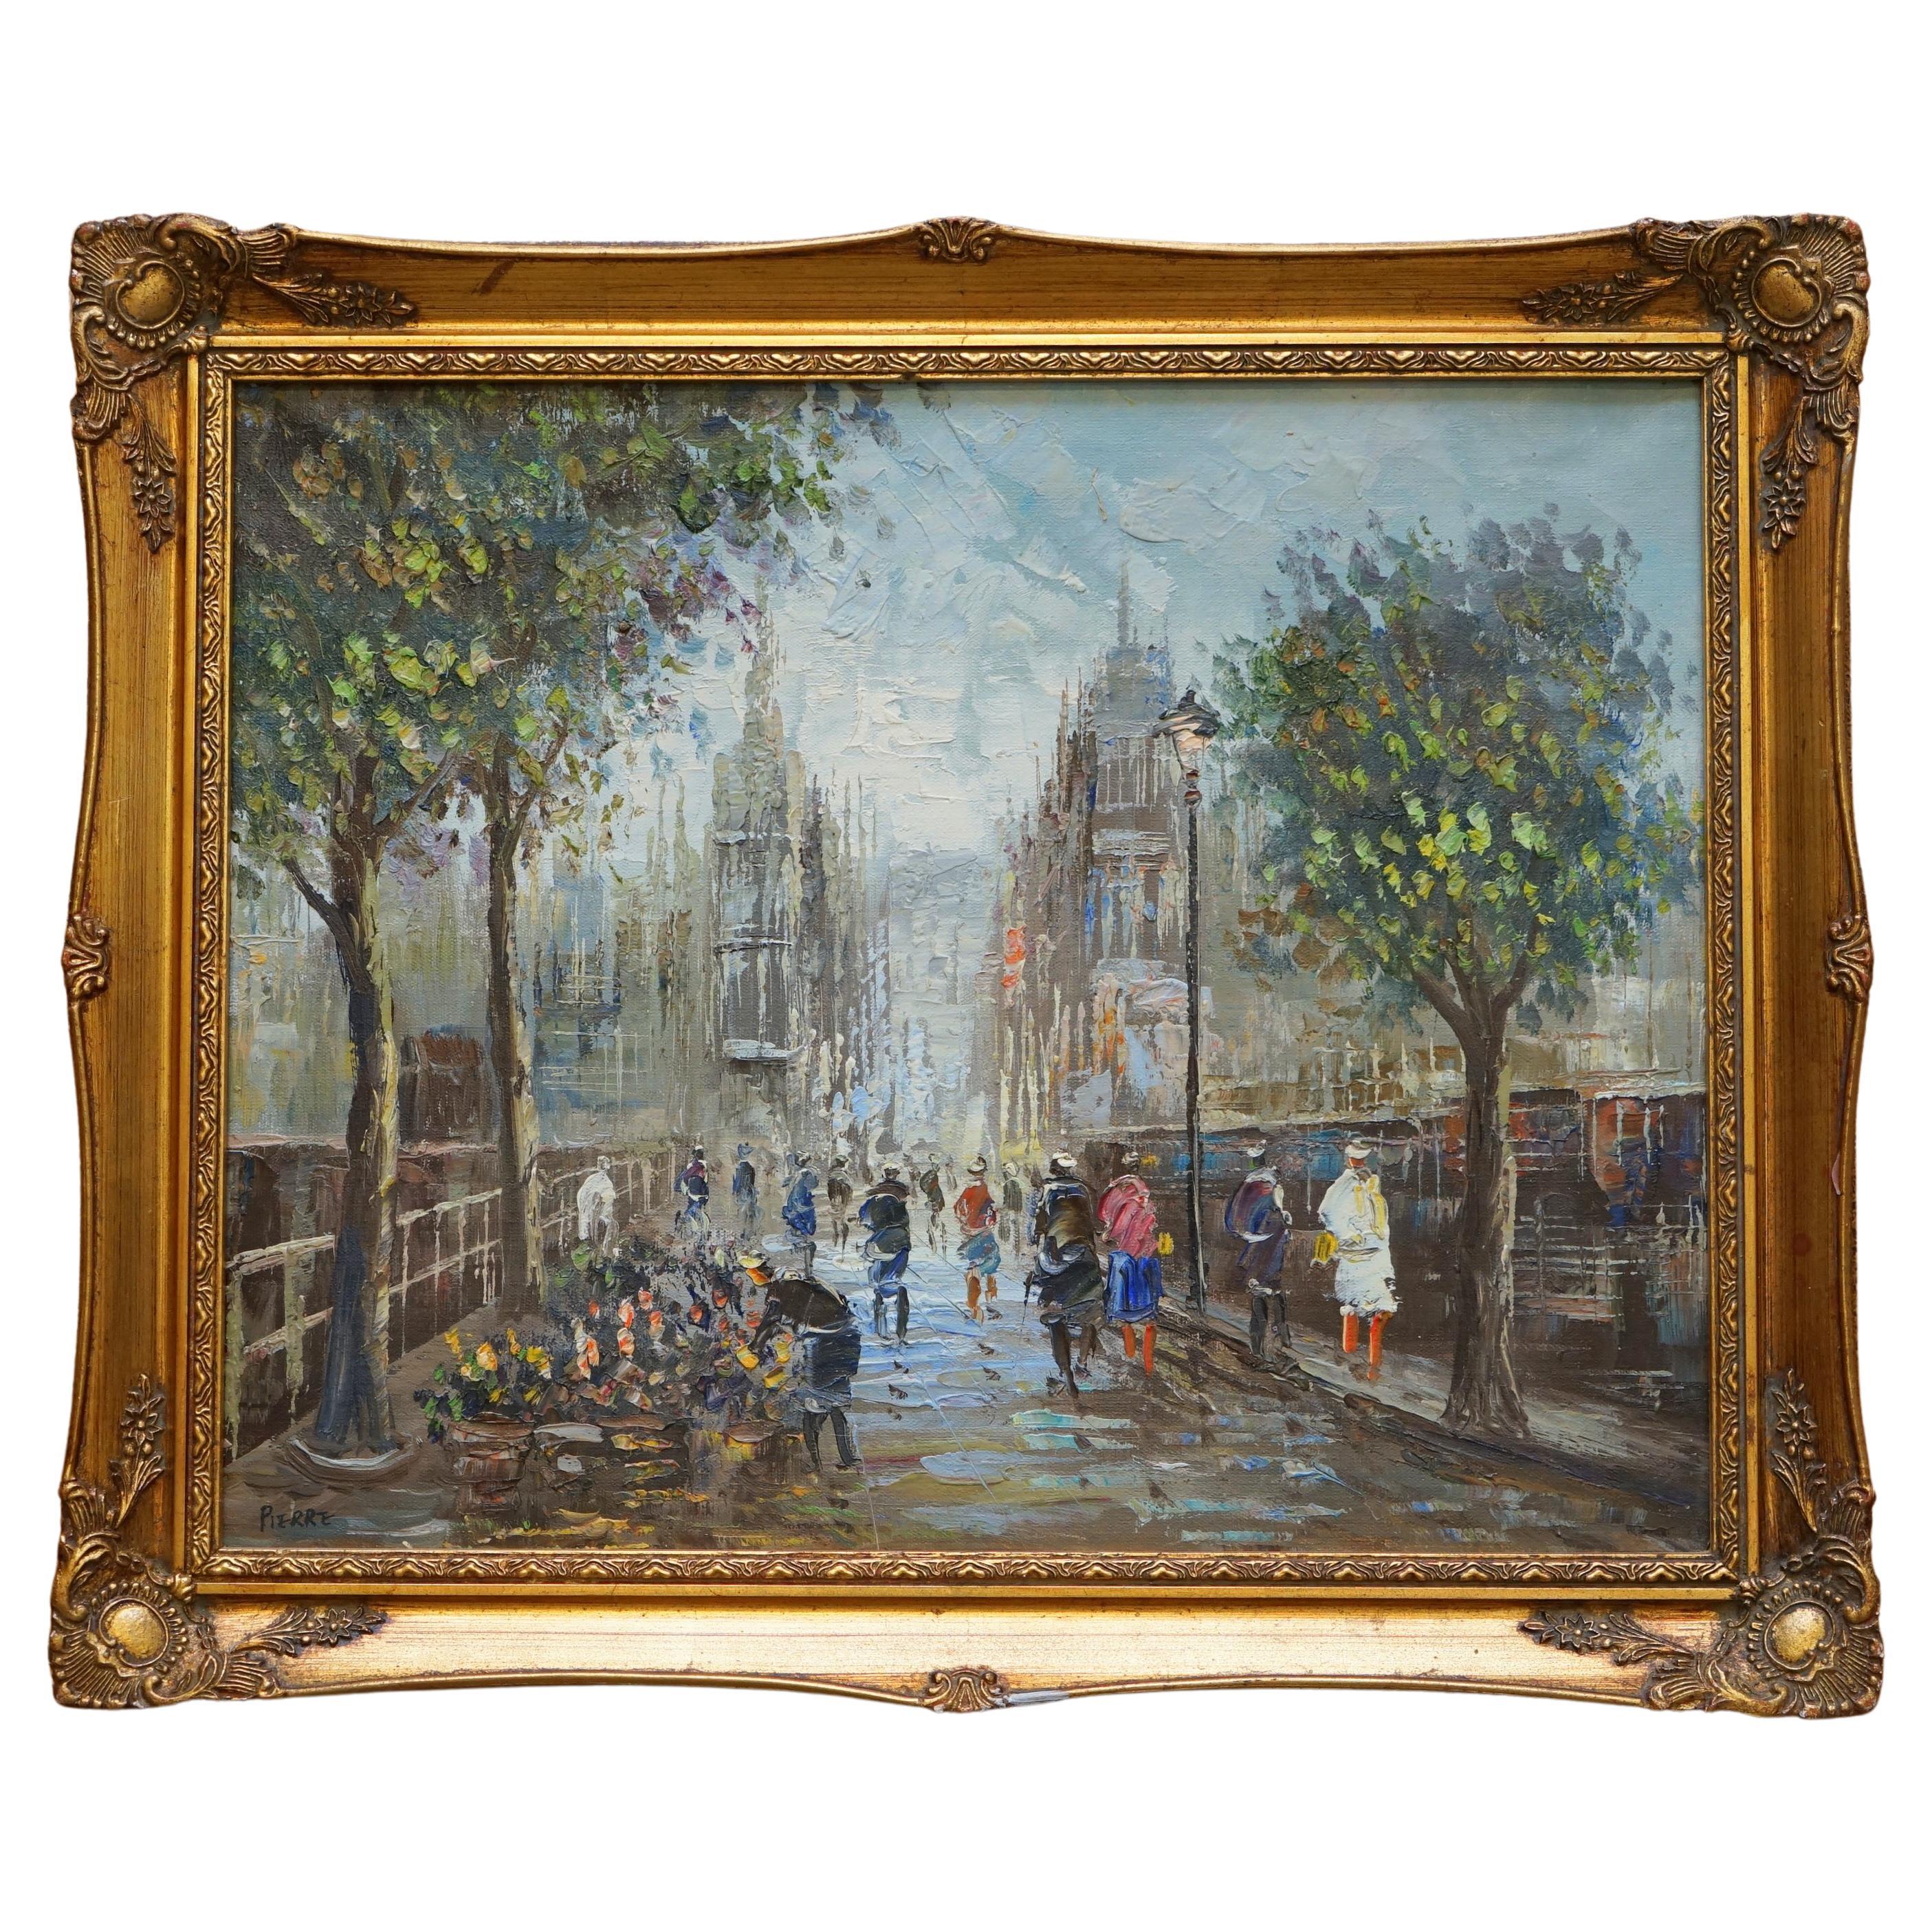 Lovely Signed Pierre Oil Painting of a French Paris Street Scene Parisian Love!